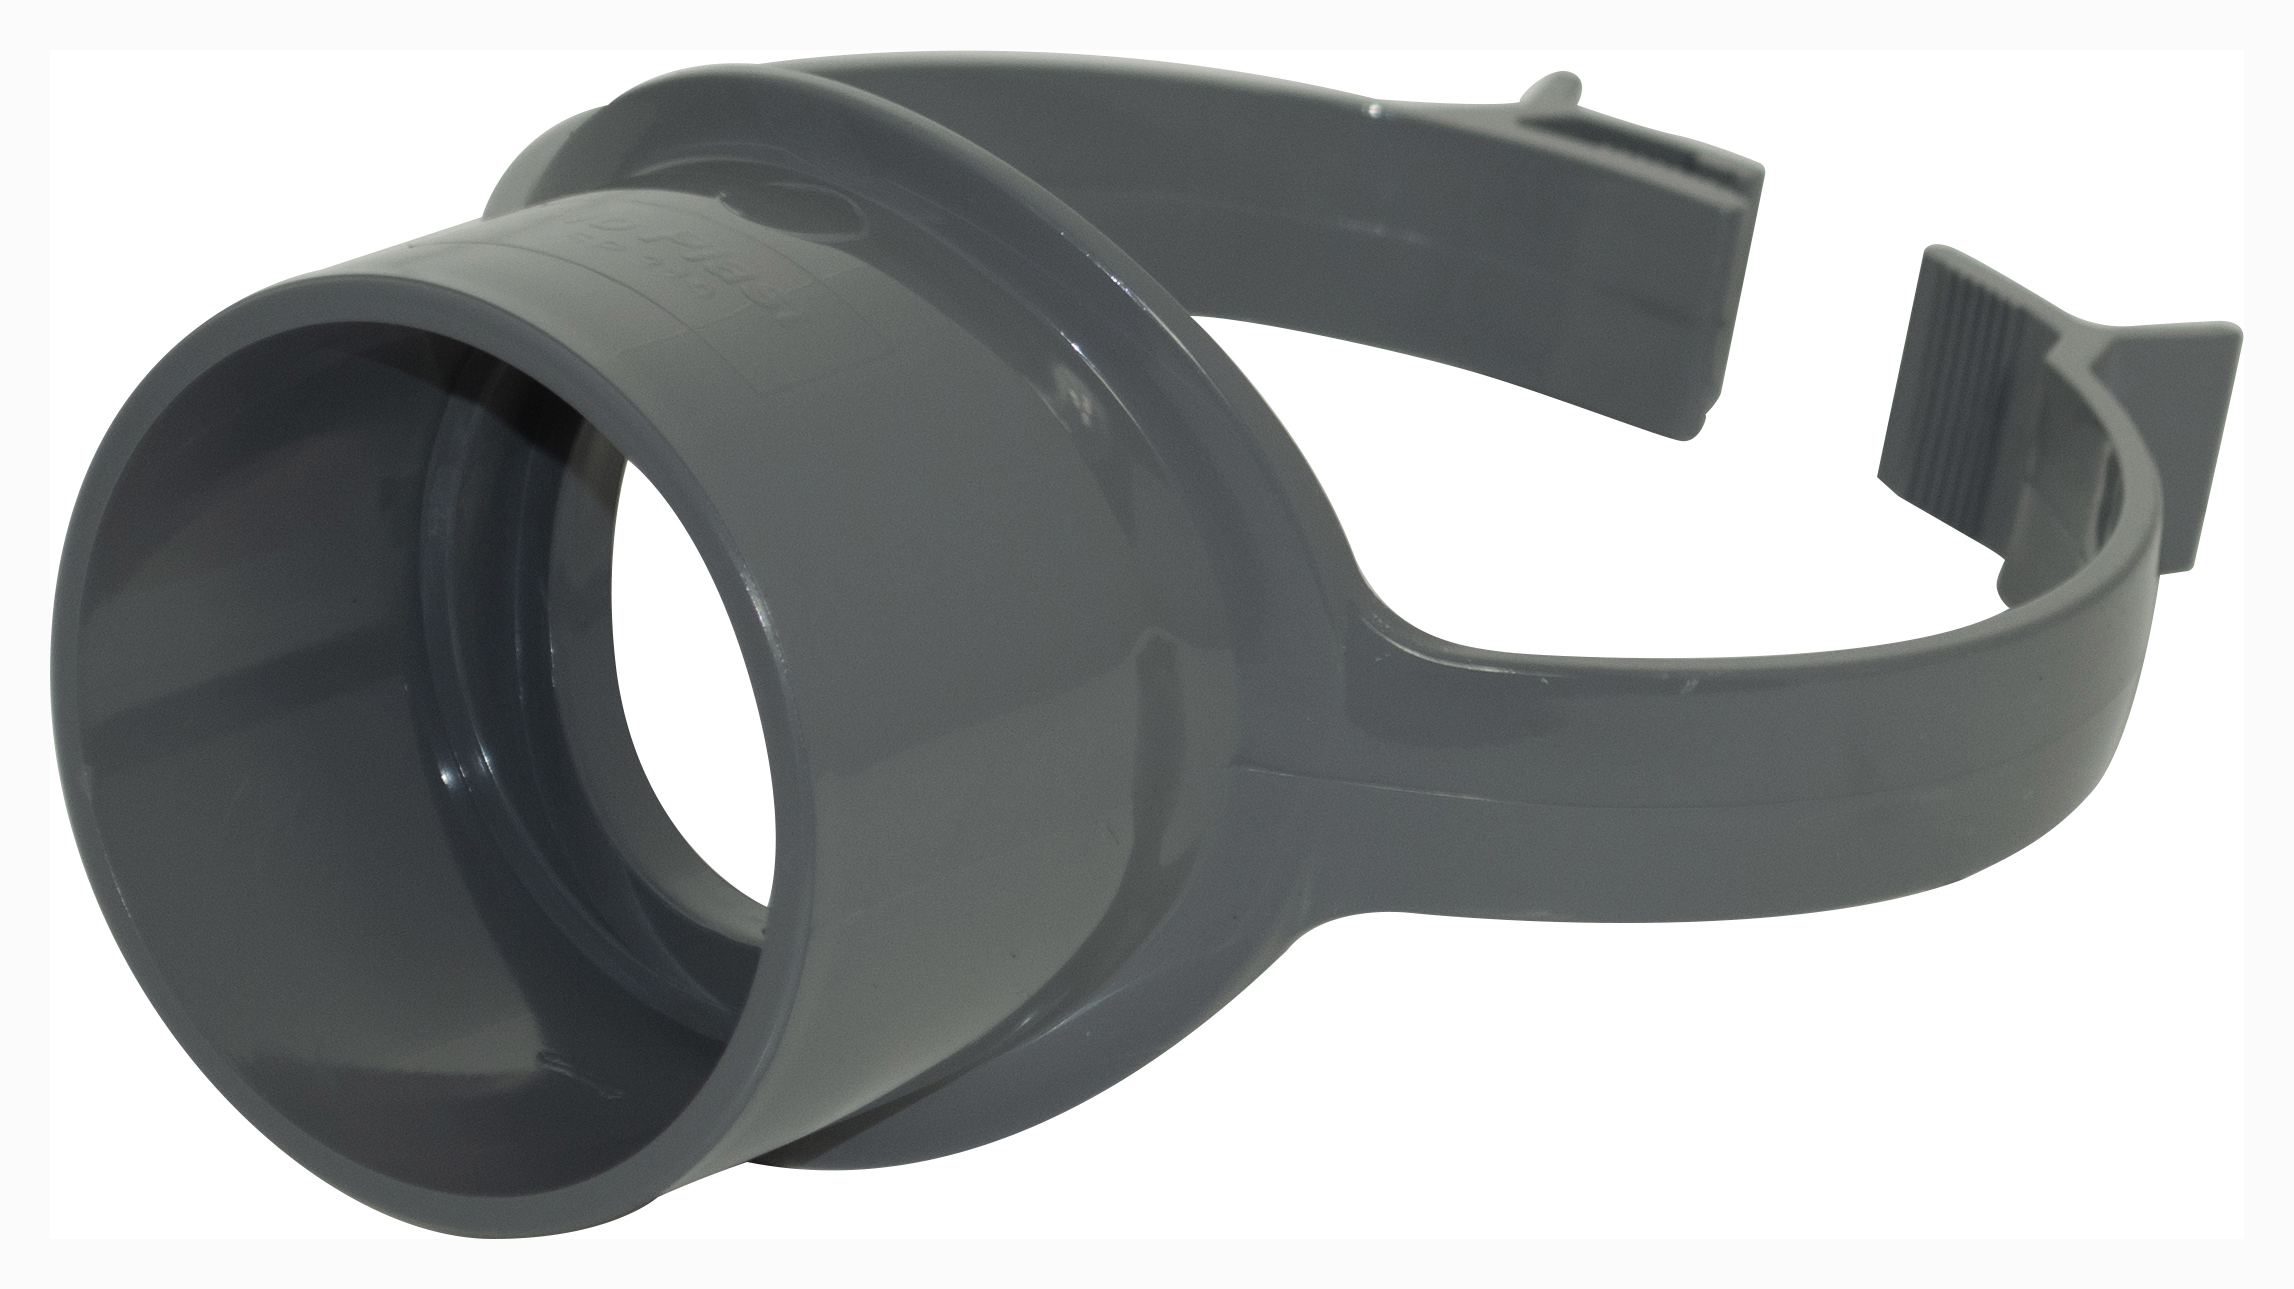 Floplast 110mm Soil Pipe Strap On Pipe Connector - Anthracite Grey SP319AG